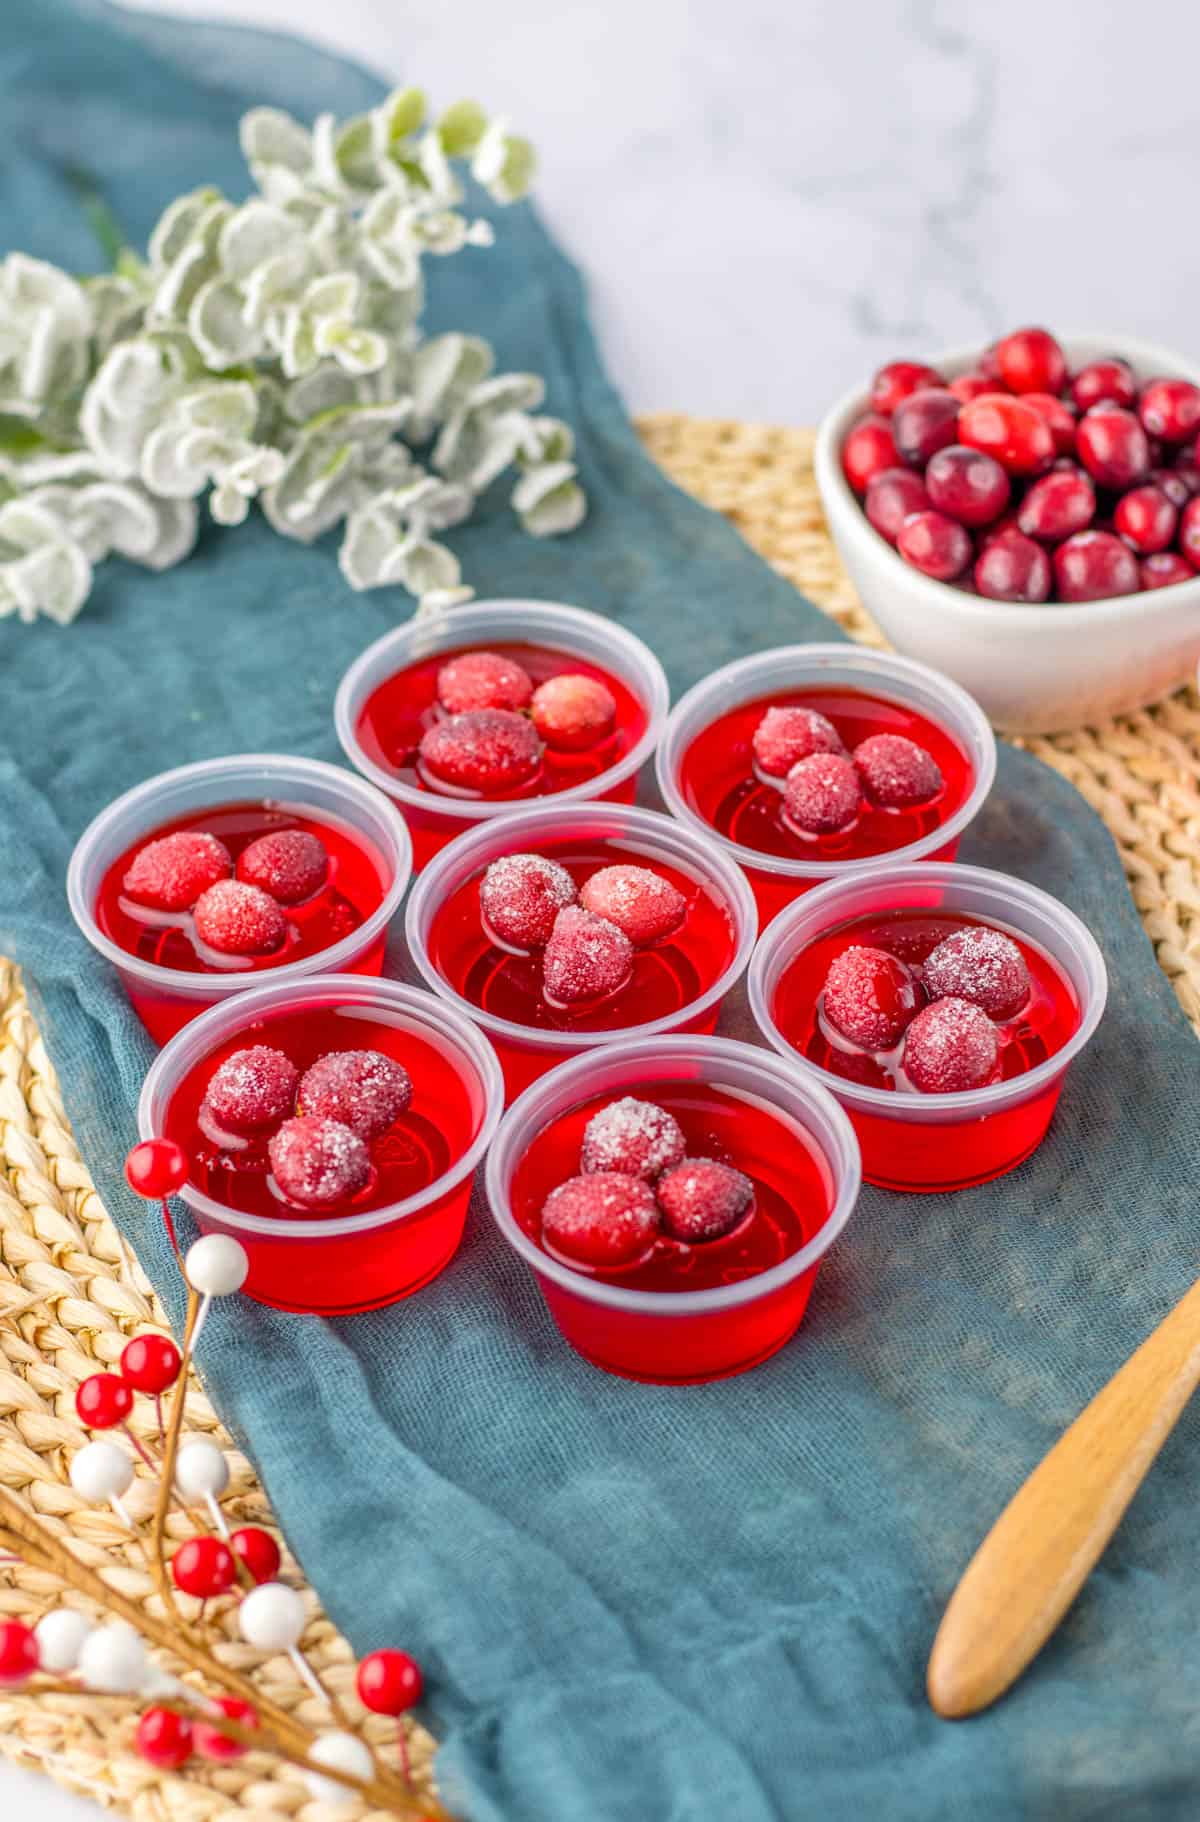 Cranberry Jello shots topped with sugared cranberries on a blue towel next to a bowl of cranberries.